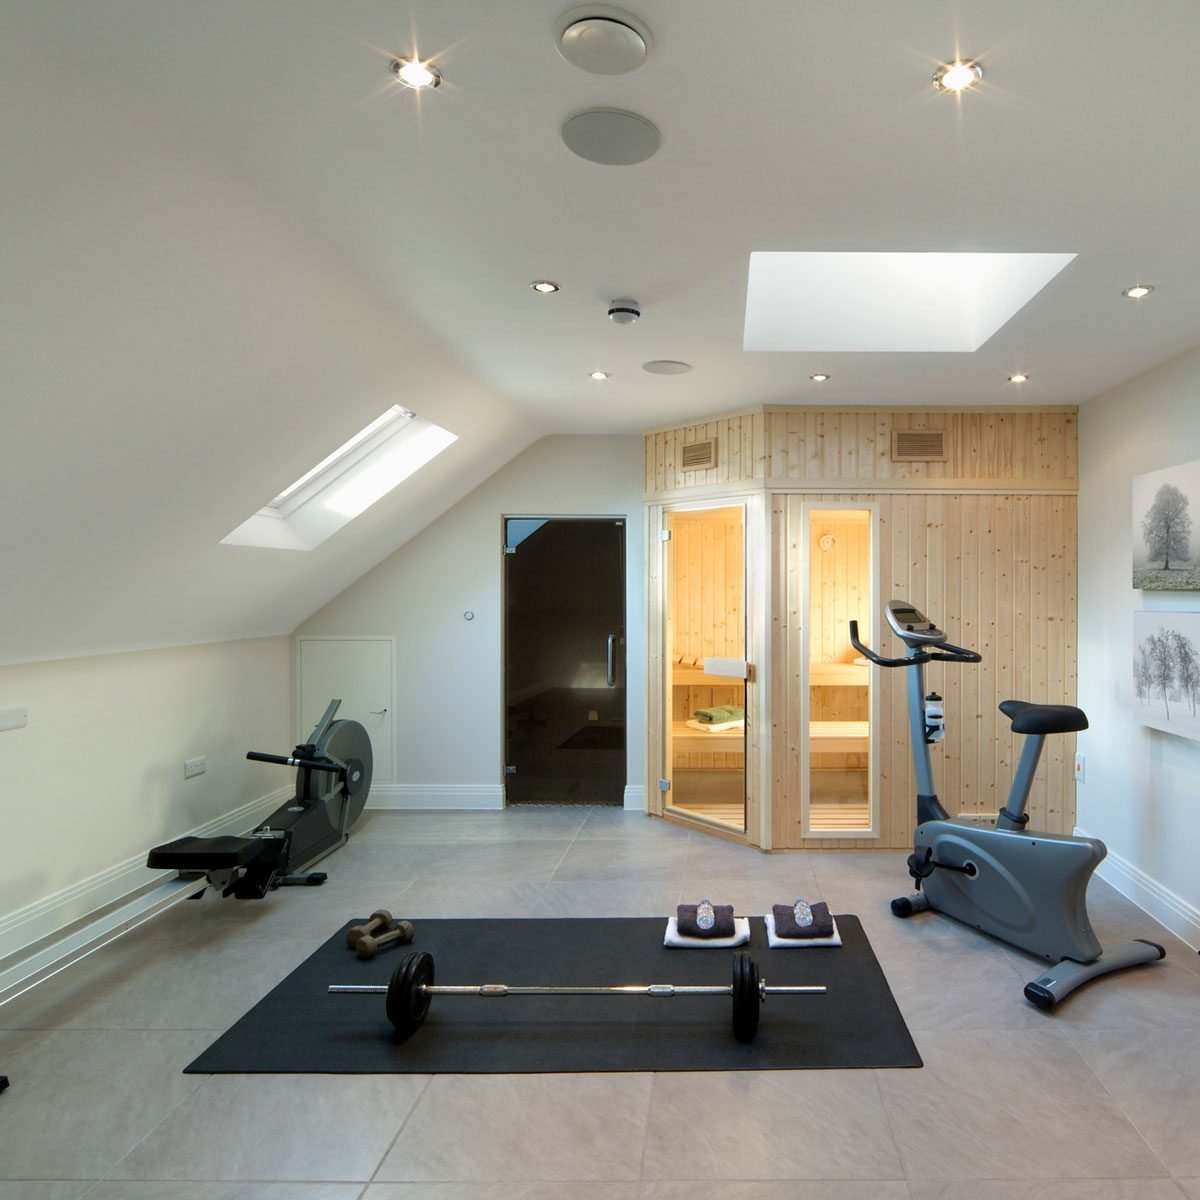 The 5 Best Home Gym Flooring Ideas, Laminate Flooring For Home Gym